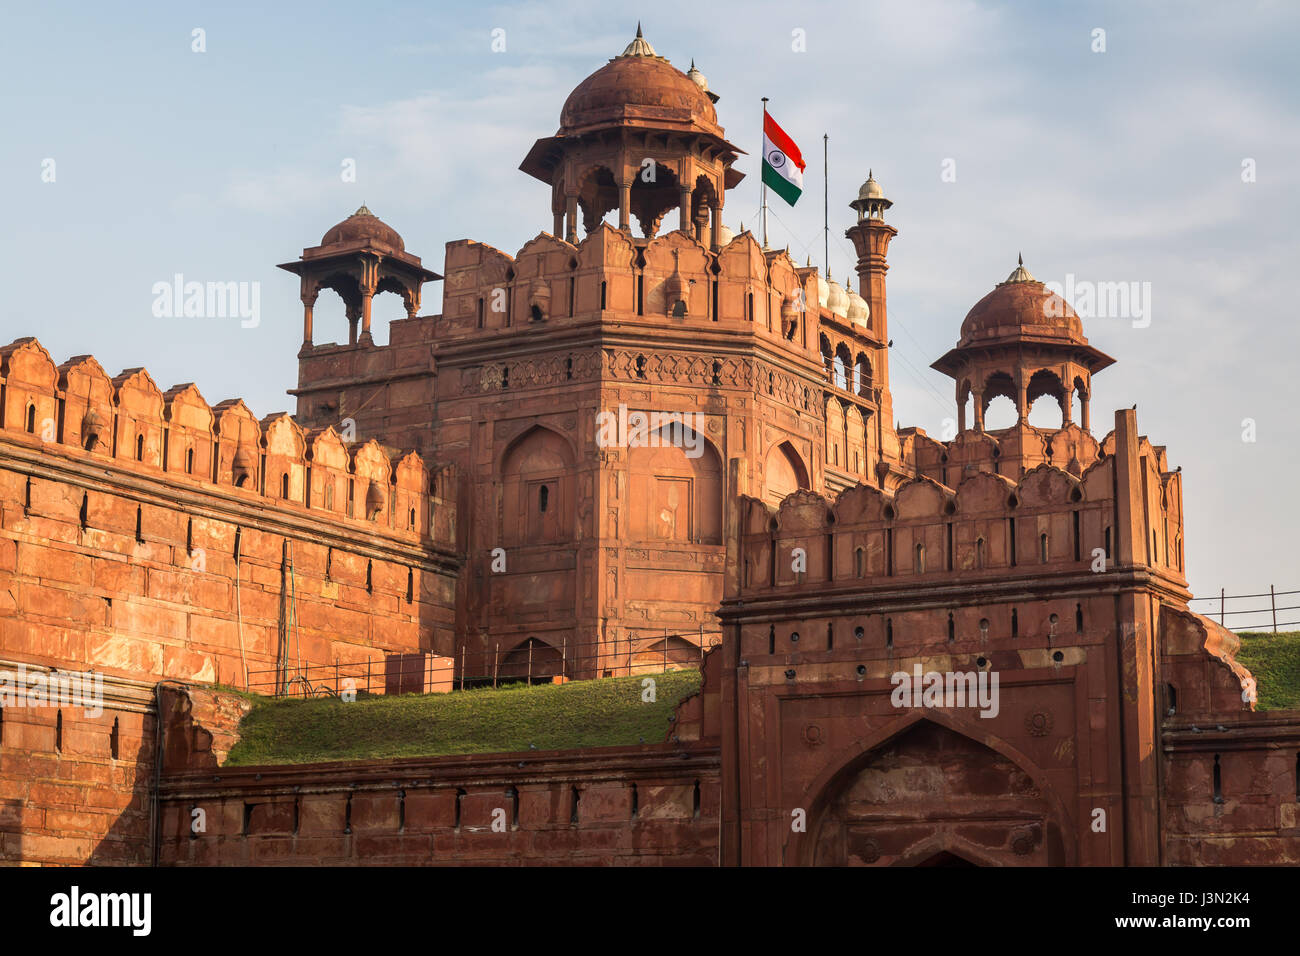 Red Fort Delhi is a red sandstone fort city built by emperor Akbar. A Mughal India architecture structure designated as a UNESCO World Heritage Site. Stock Photo